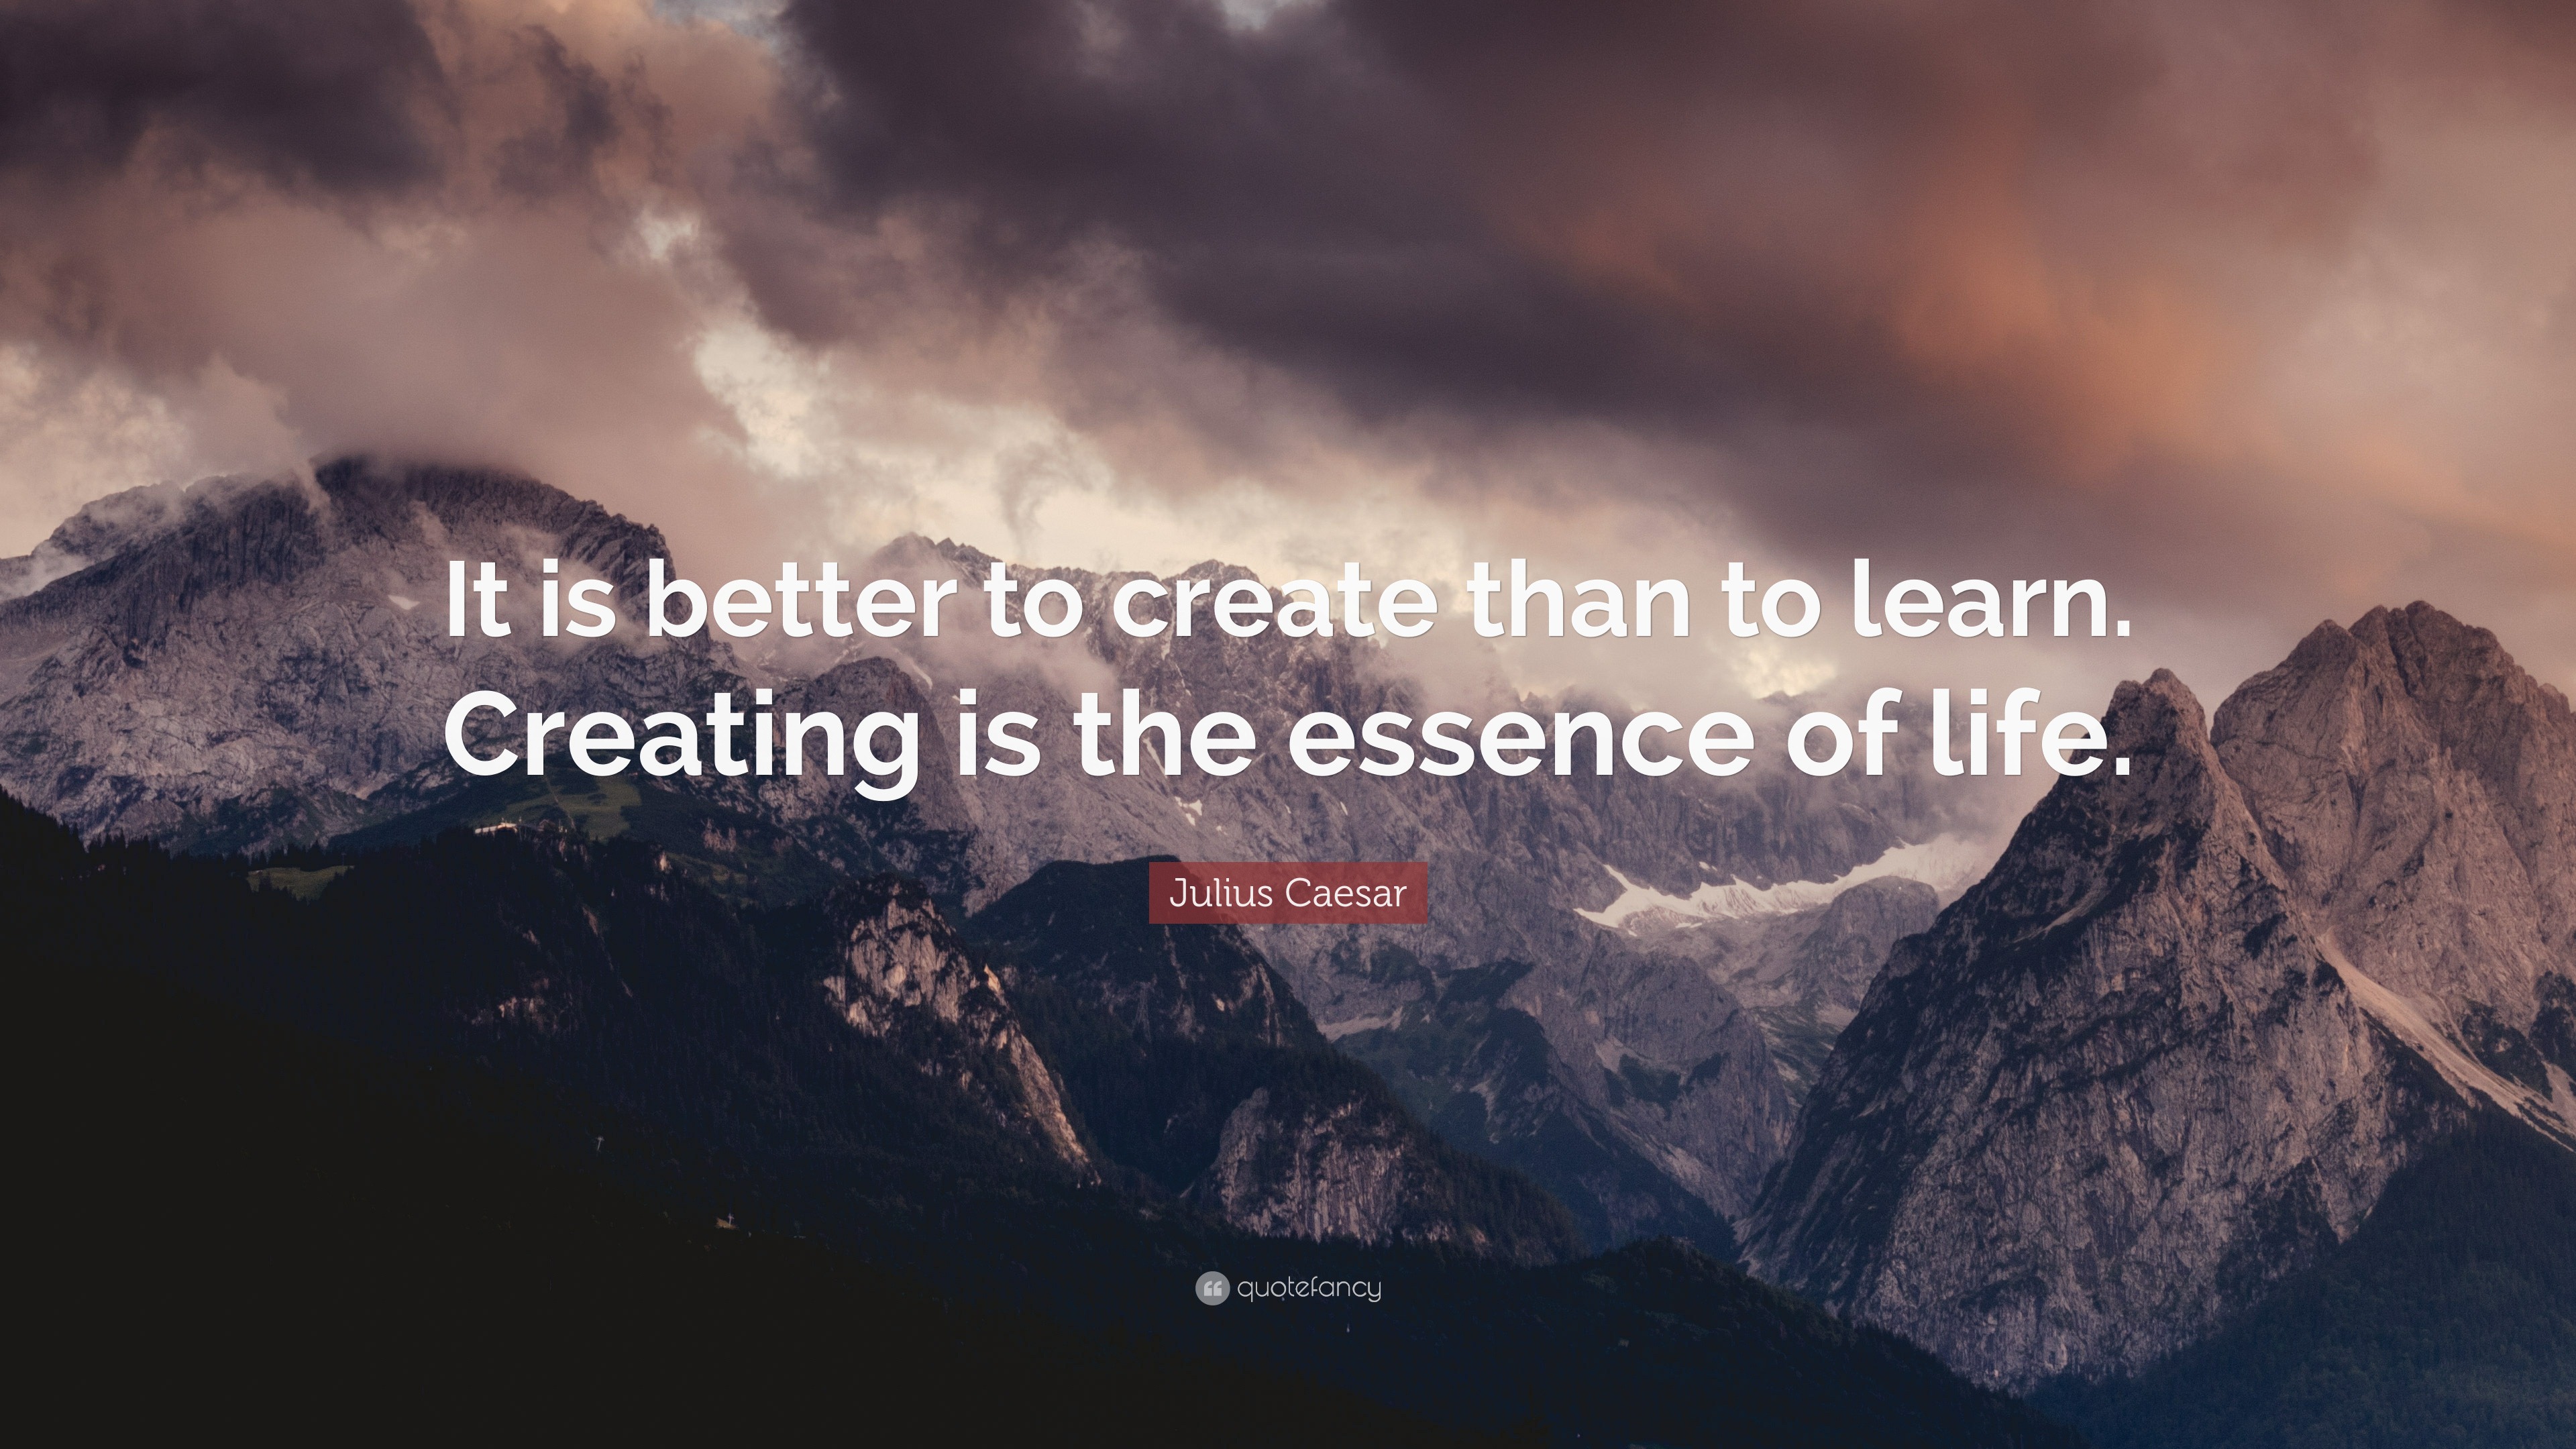 Julius Caesar Quote: “It is better to create than to learn. Creating is